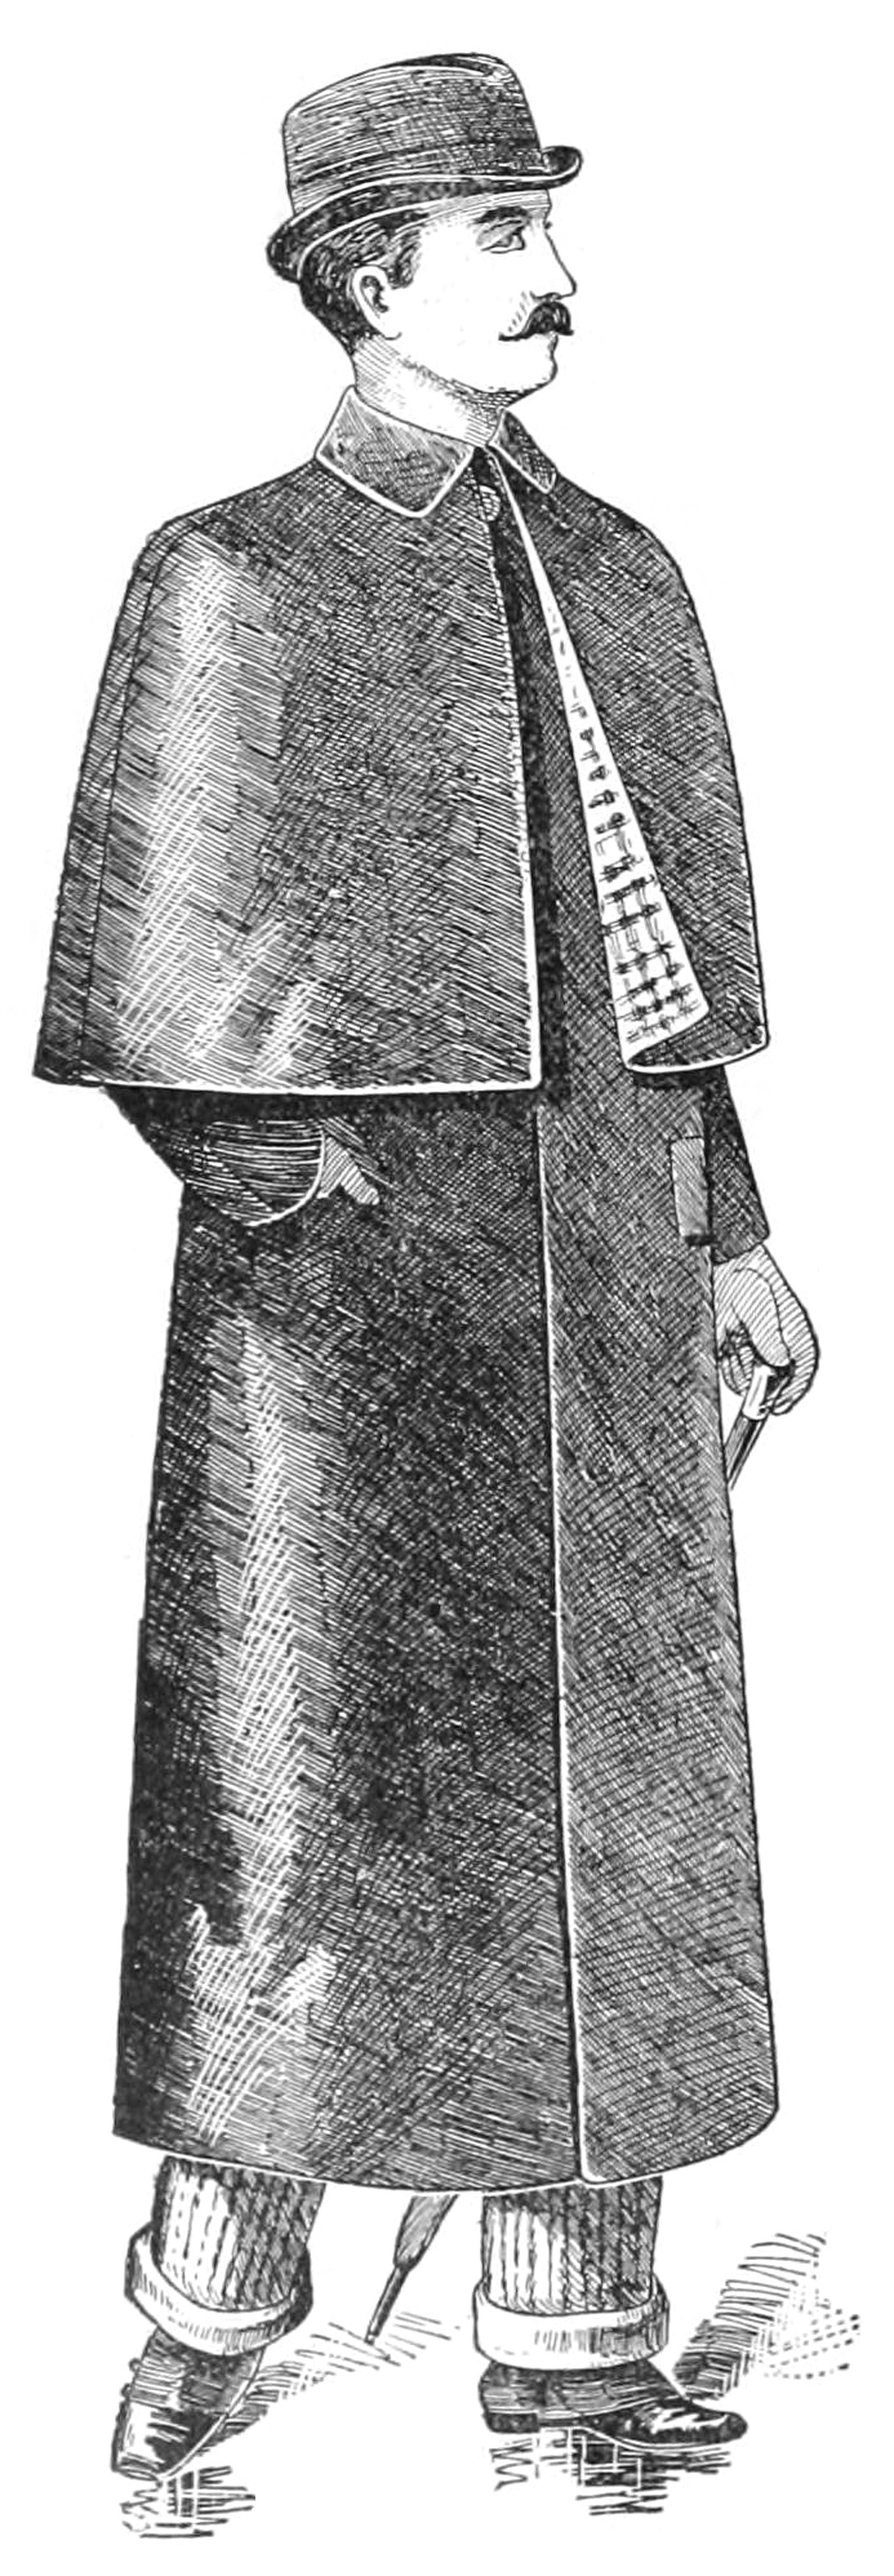 An illustration of a mackintosh in a 1893 department store catalog.